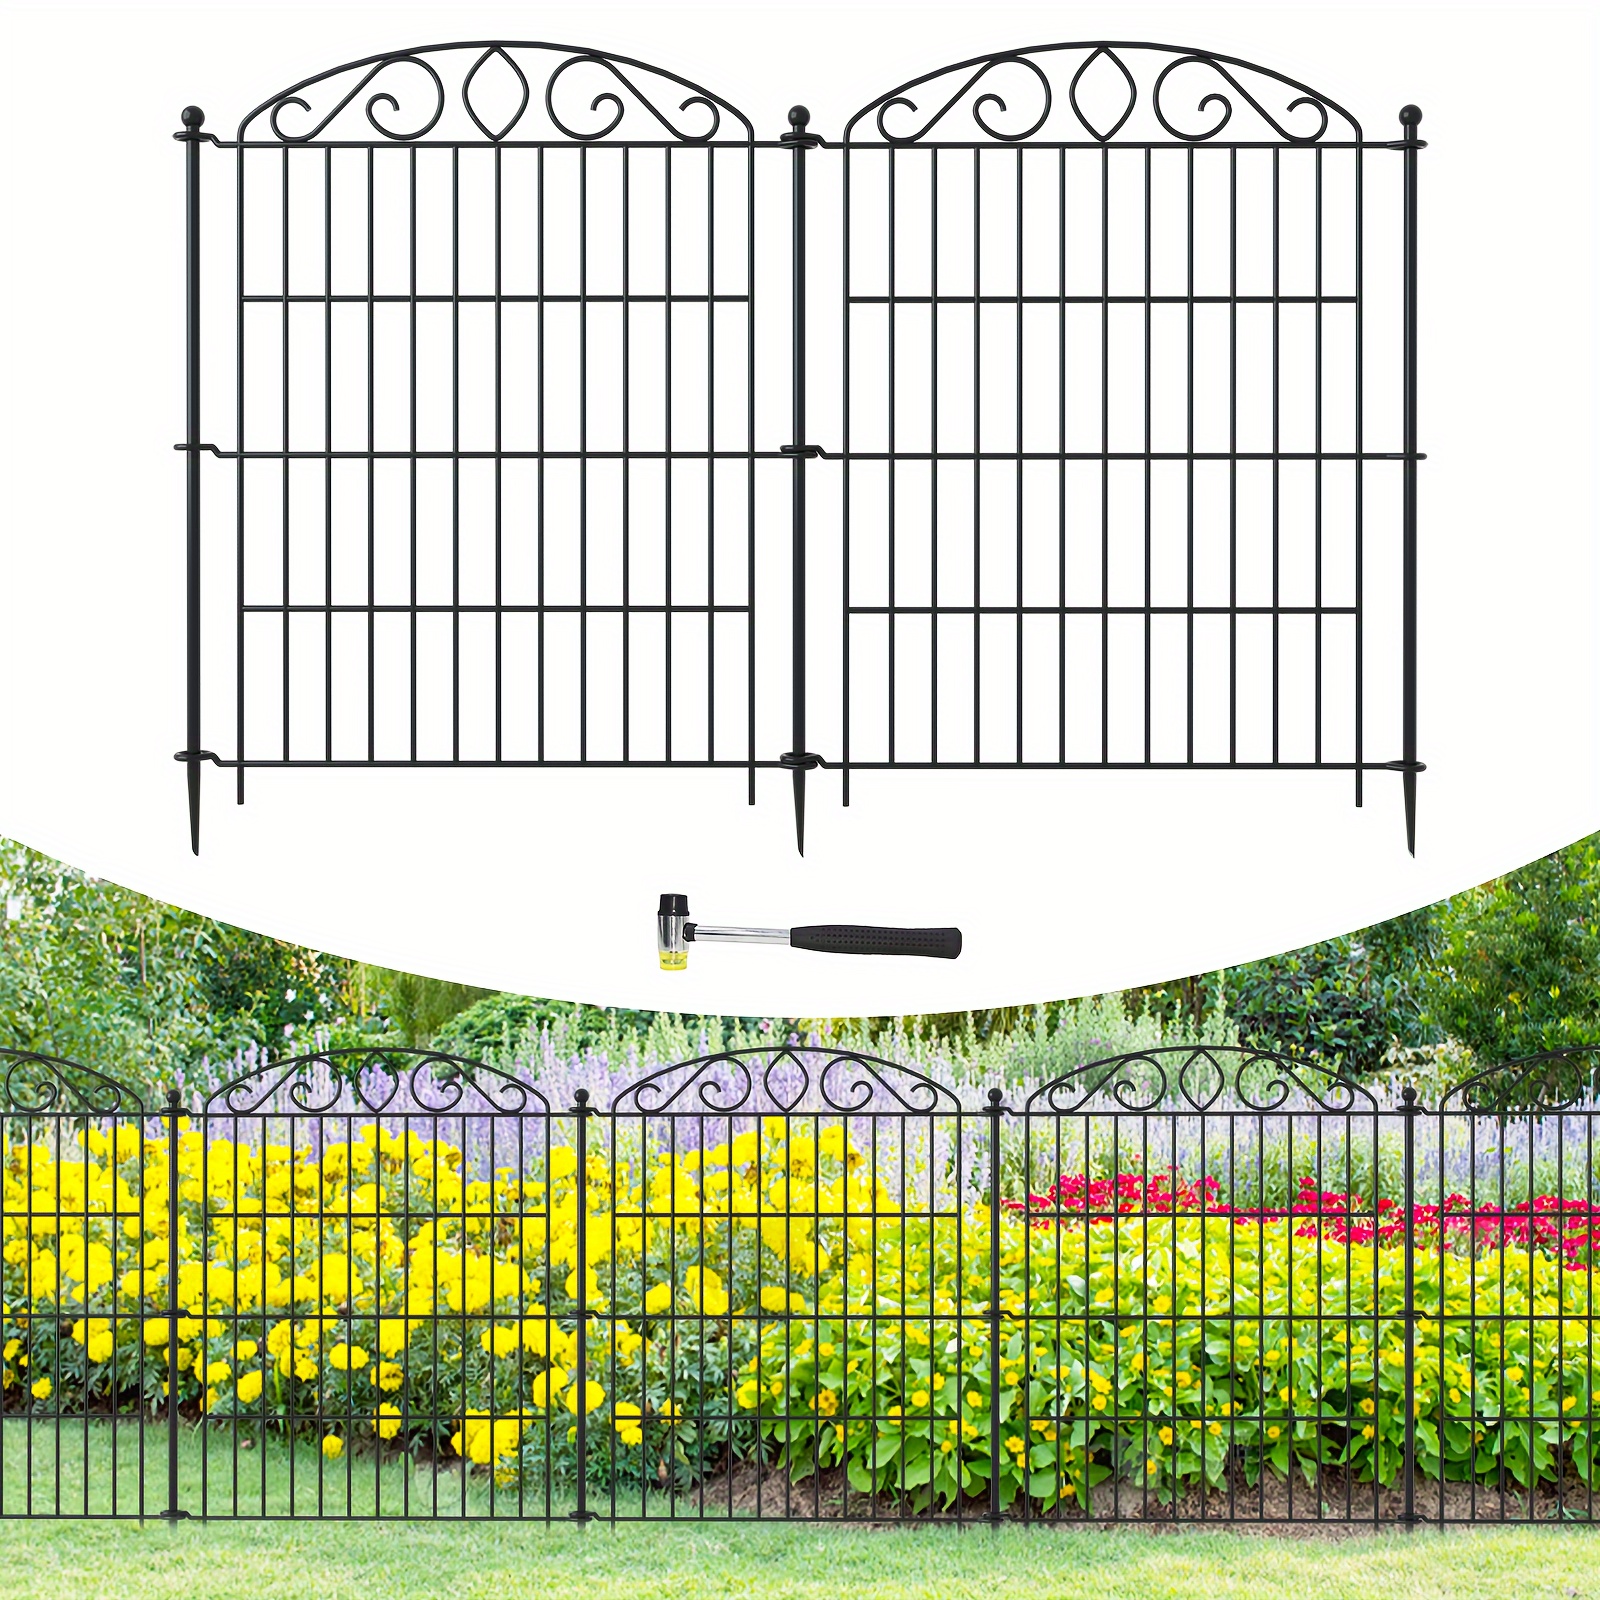 

Decorative Outdoor Dog Garden Fence For Yard, 30 In (h) Tall 6 Pack/ 12 Pack Animal Barrier No Dig Fencing Rustproof Metal Wire Panel Border For Dog, Rabbits, And Patio Temporary Ground Stakes